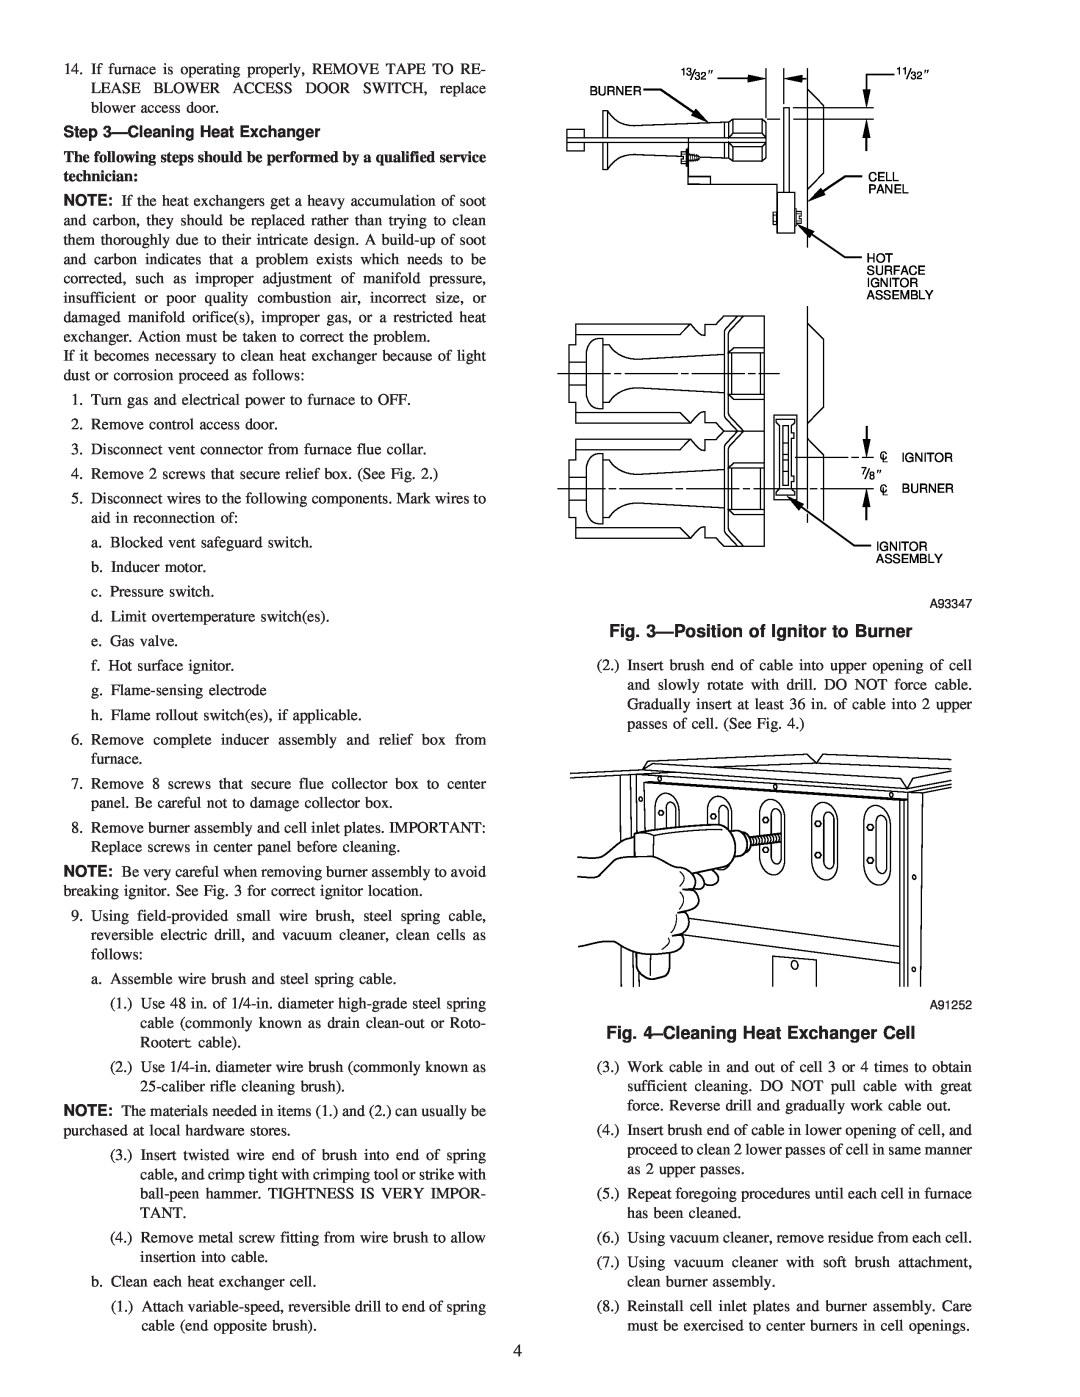 Carrier 58YAV instruction manual ÐPosition of Ignitor to Burner, ±Cleaning Heat Exchanger Cell, ÐCleaning Heat Exchanger 